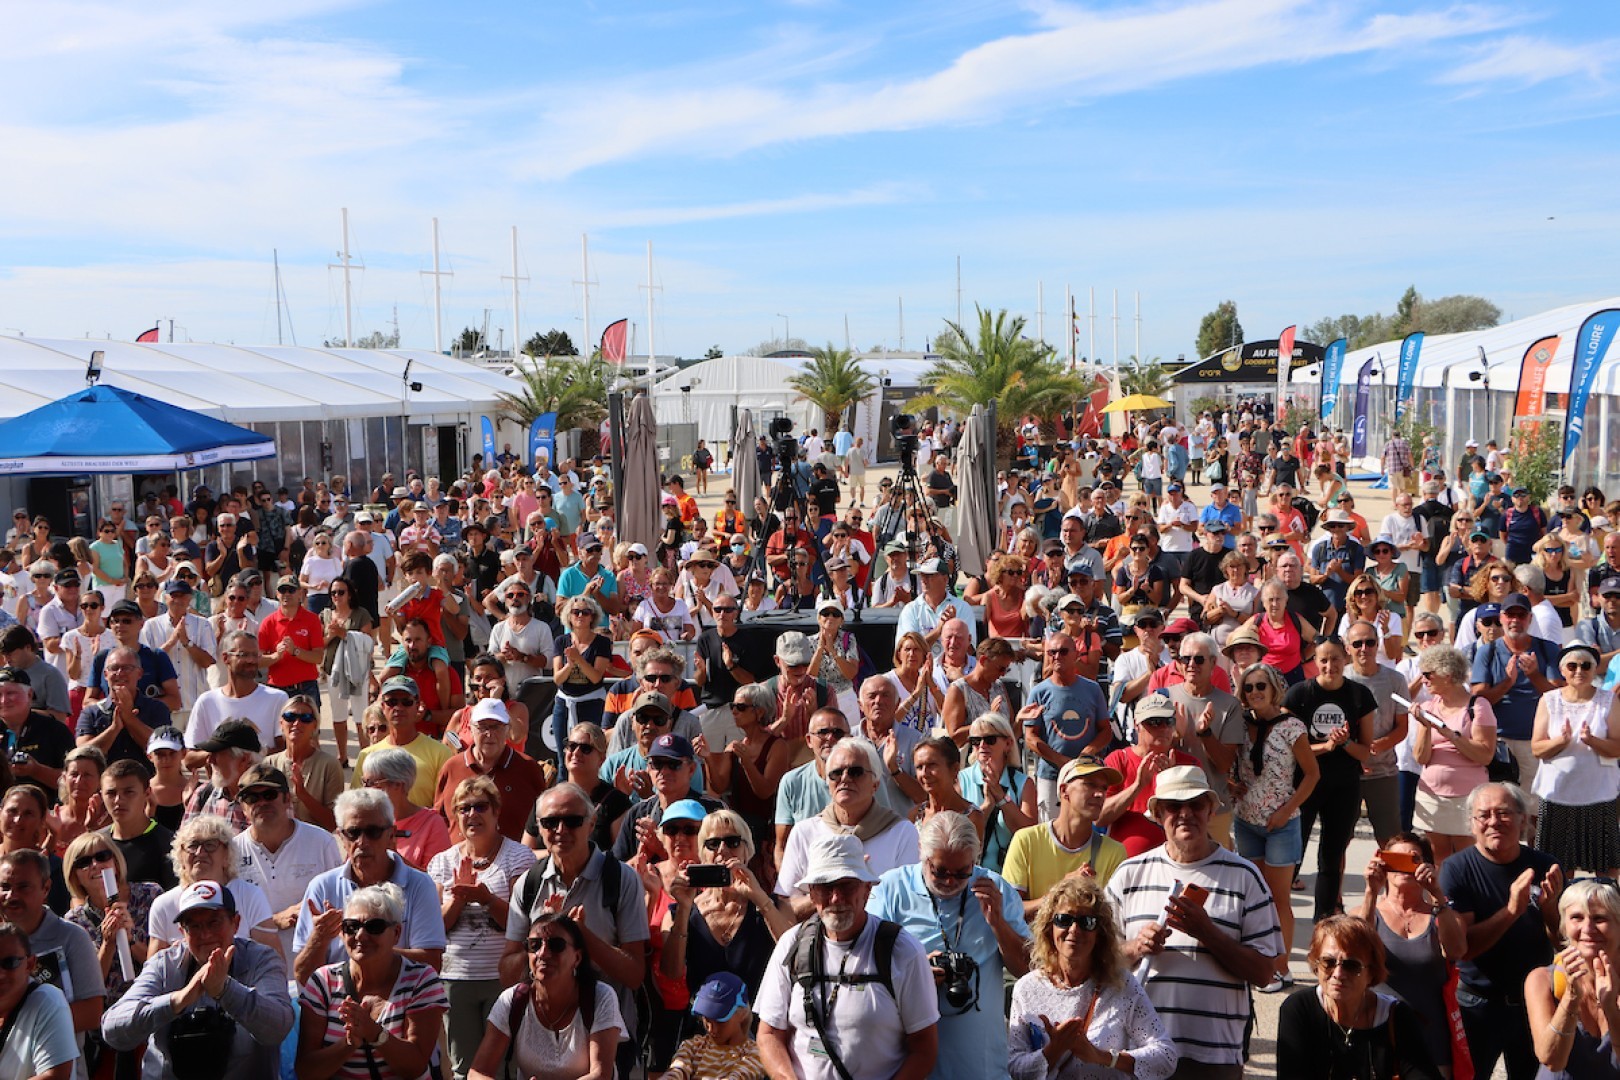 Thousands come daily to the Golden Globe Race Village activities and exhibitions. Credit GGR2022/Nora Havel